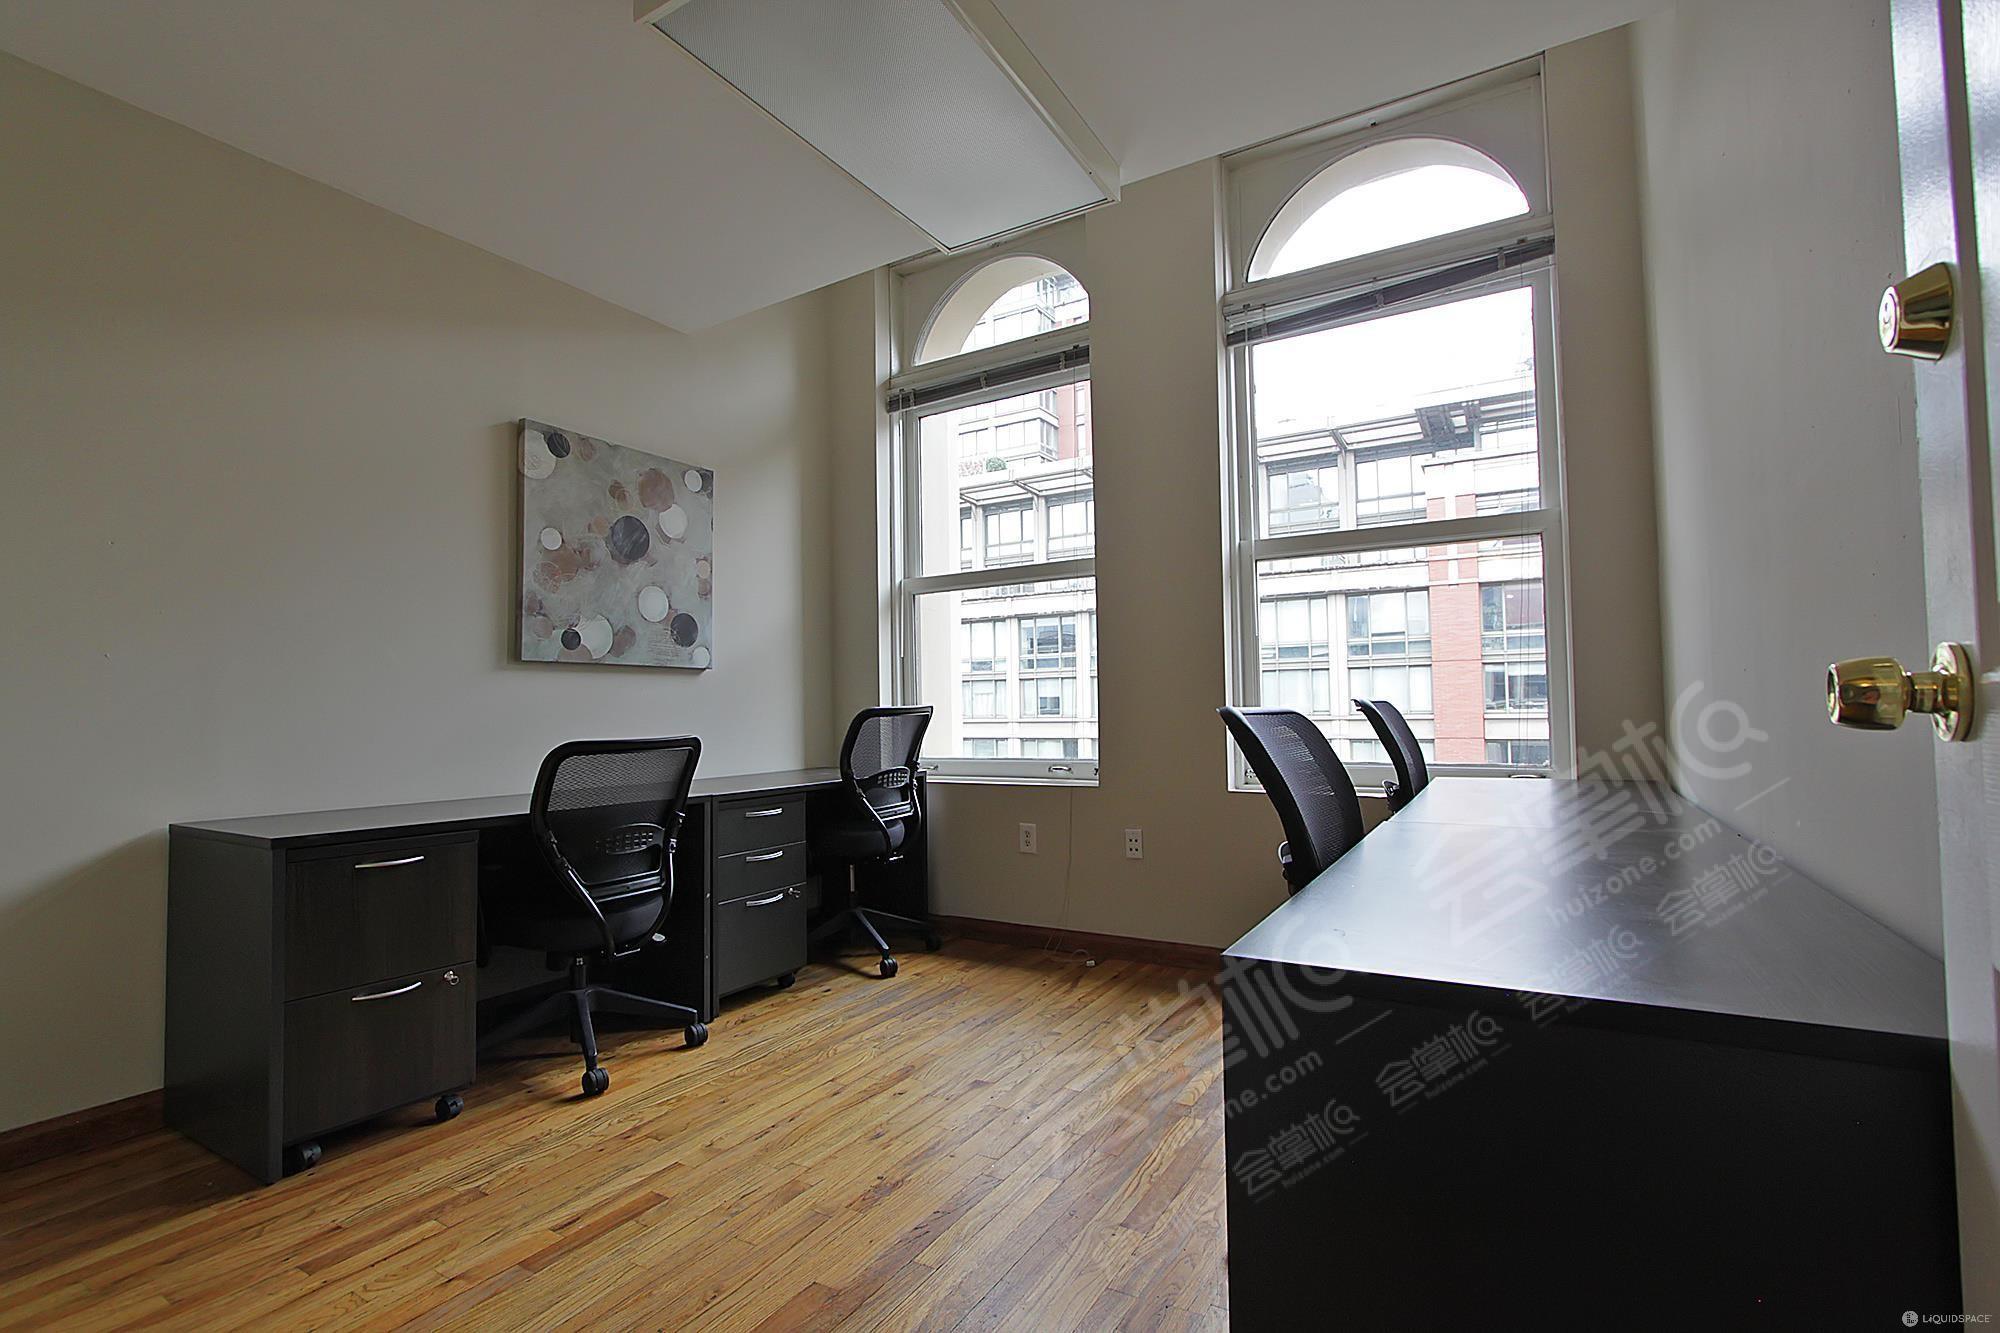 Select Office Suites - CHELSEA3